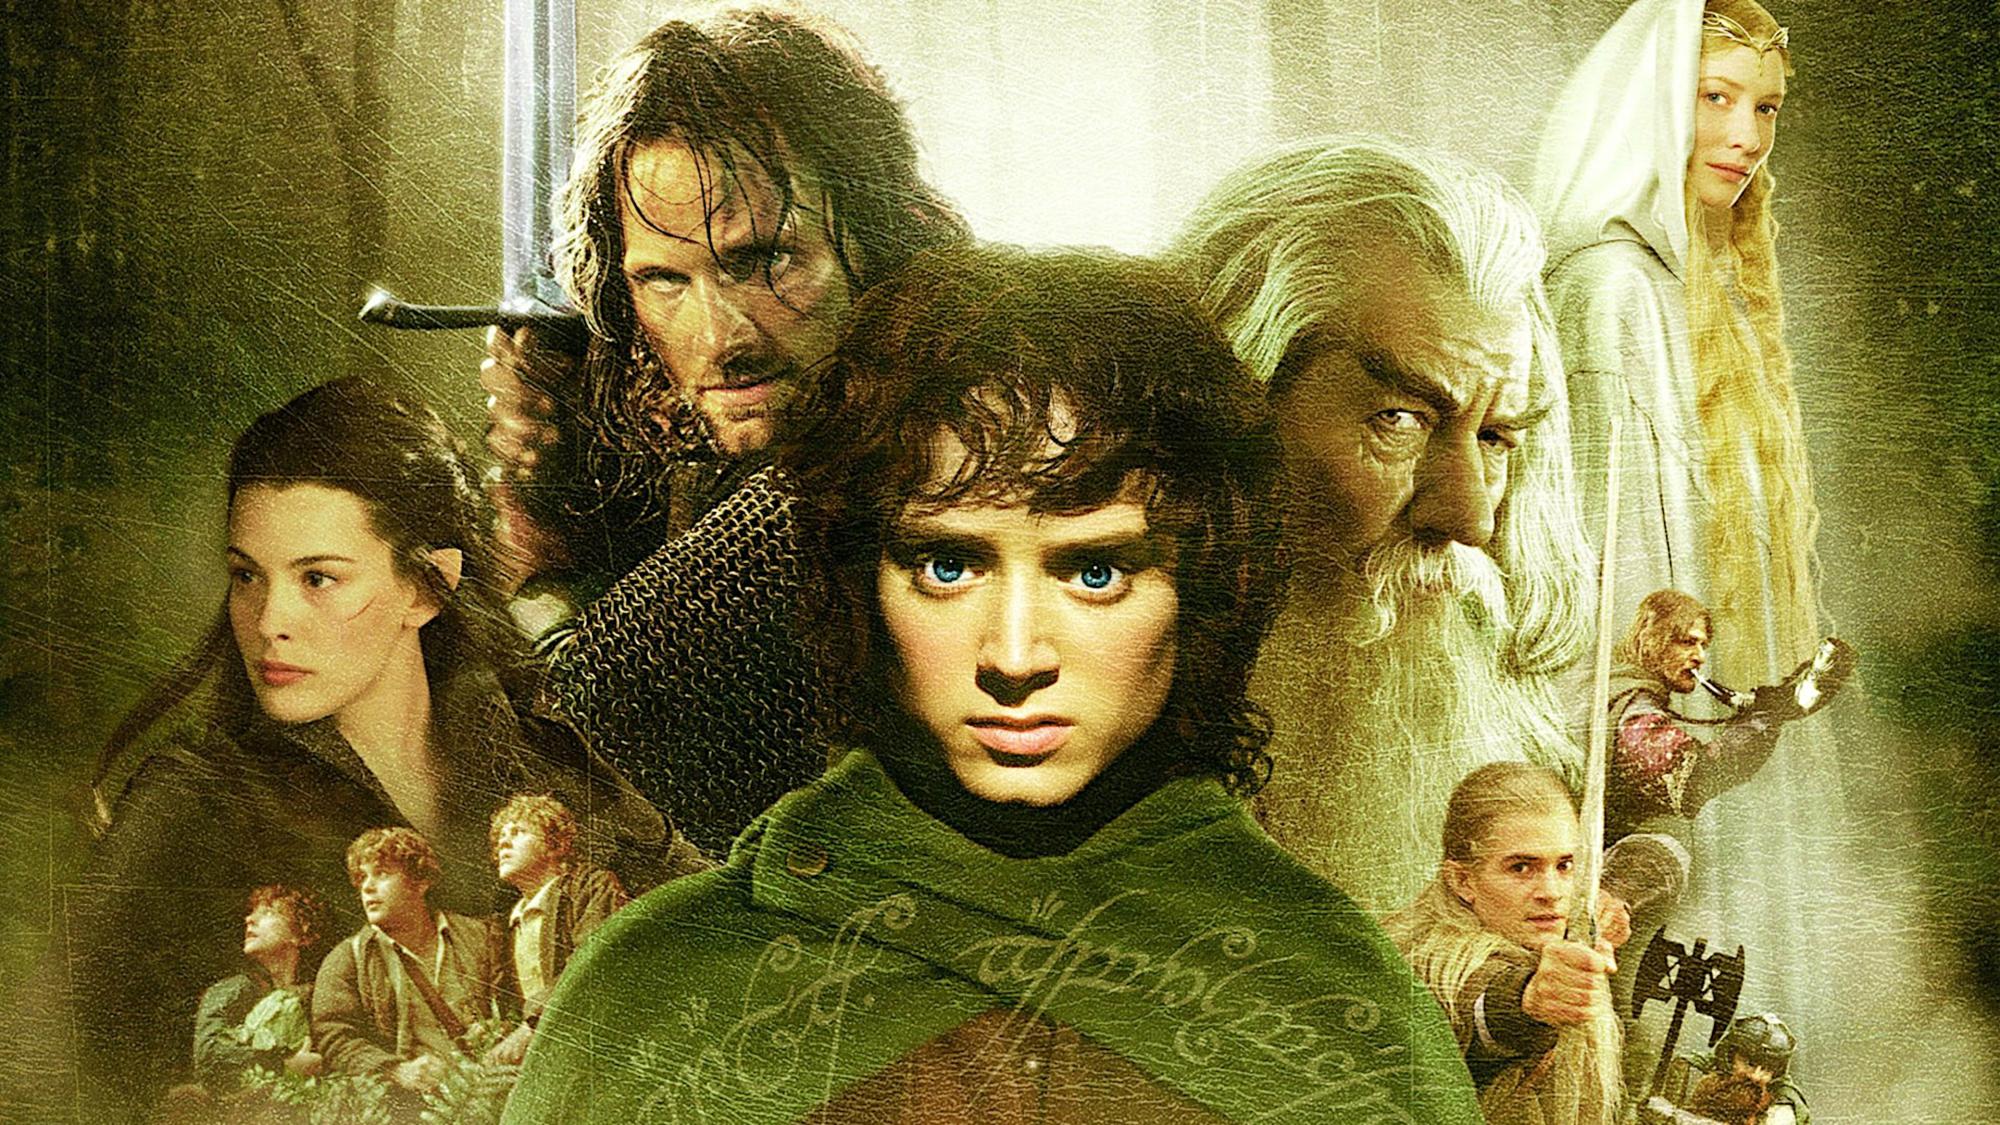 Backdrop Image for The Lord of the Rings: The Fellowship of the Ring